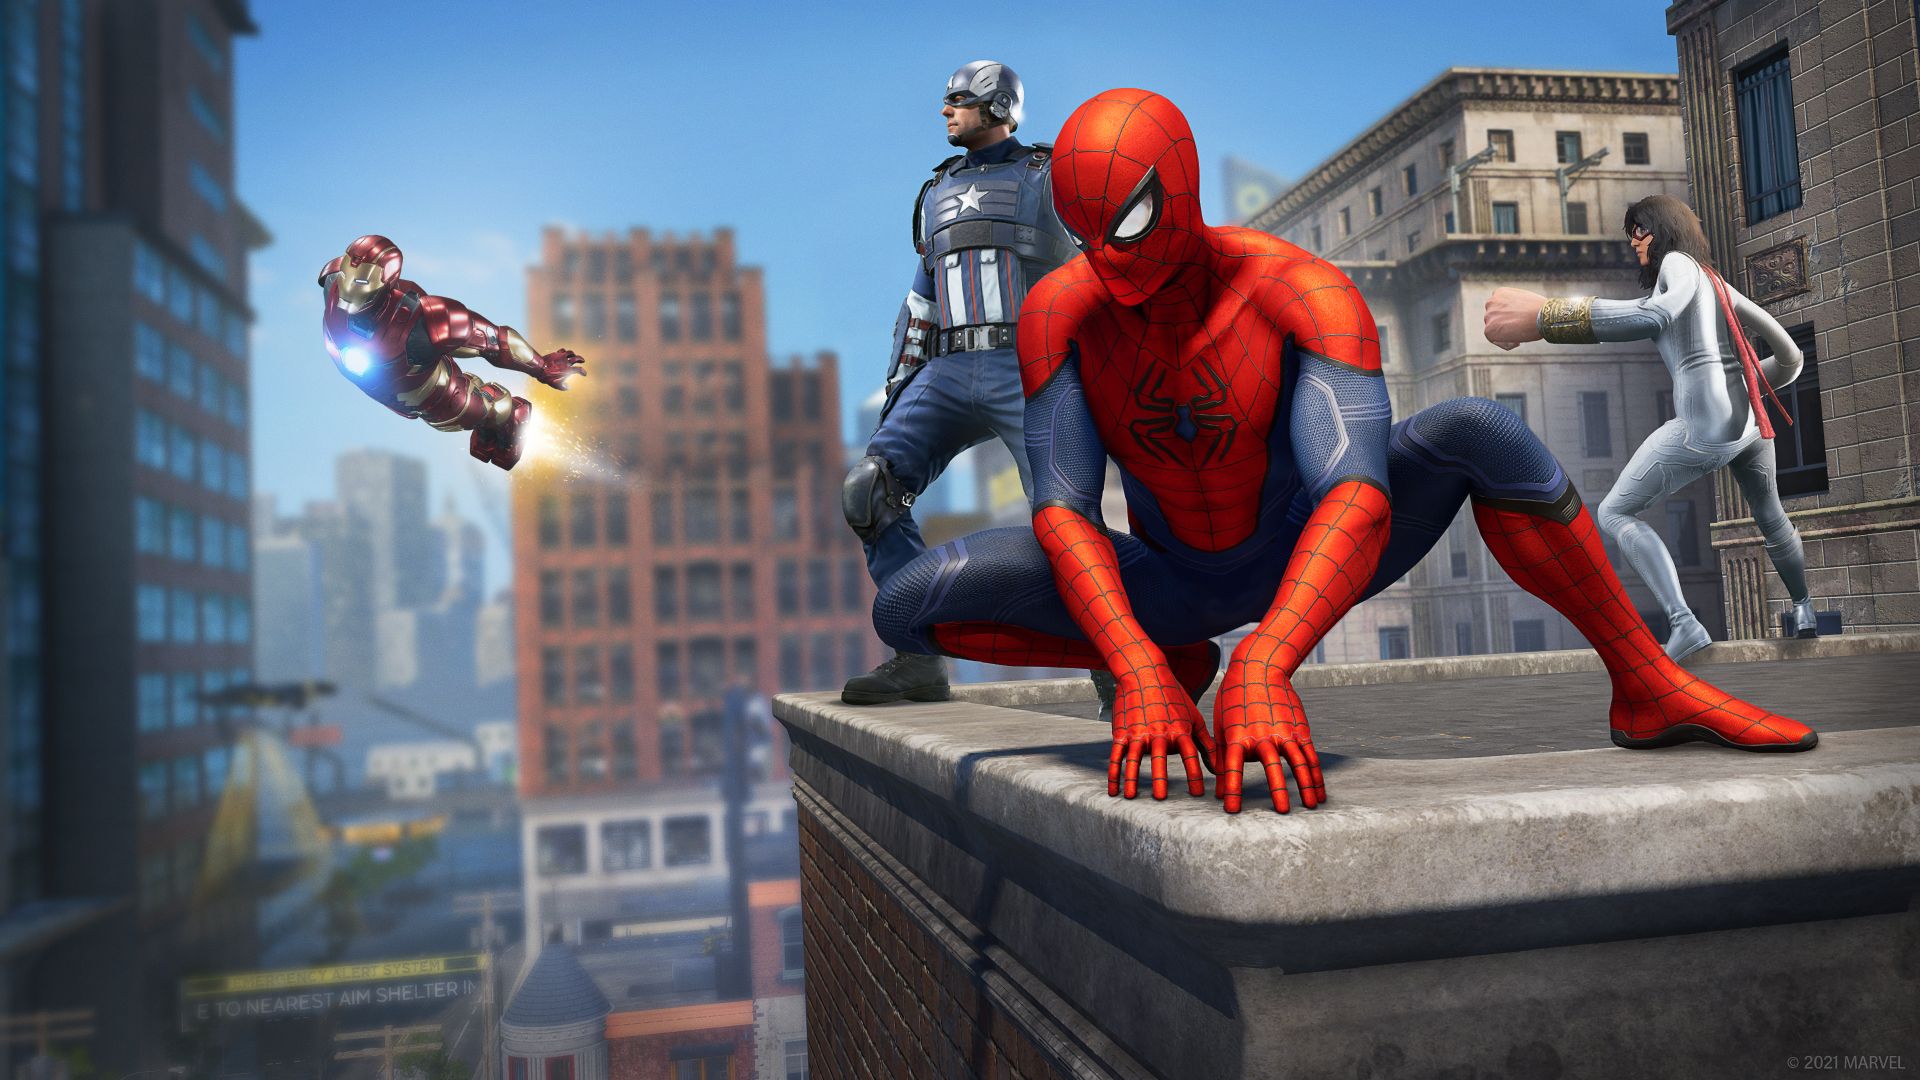 Spider-Man perches on a ledge with the rest of The Avengers.